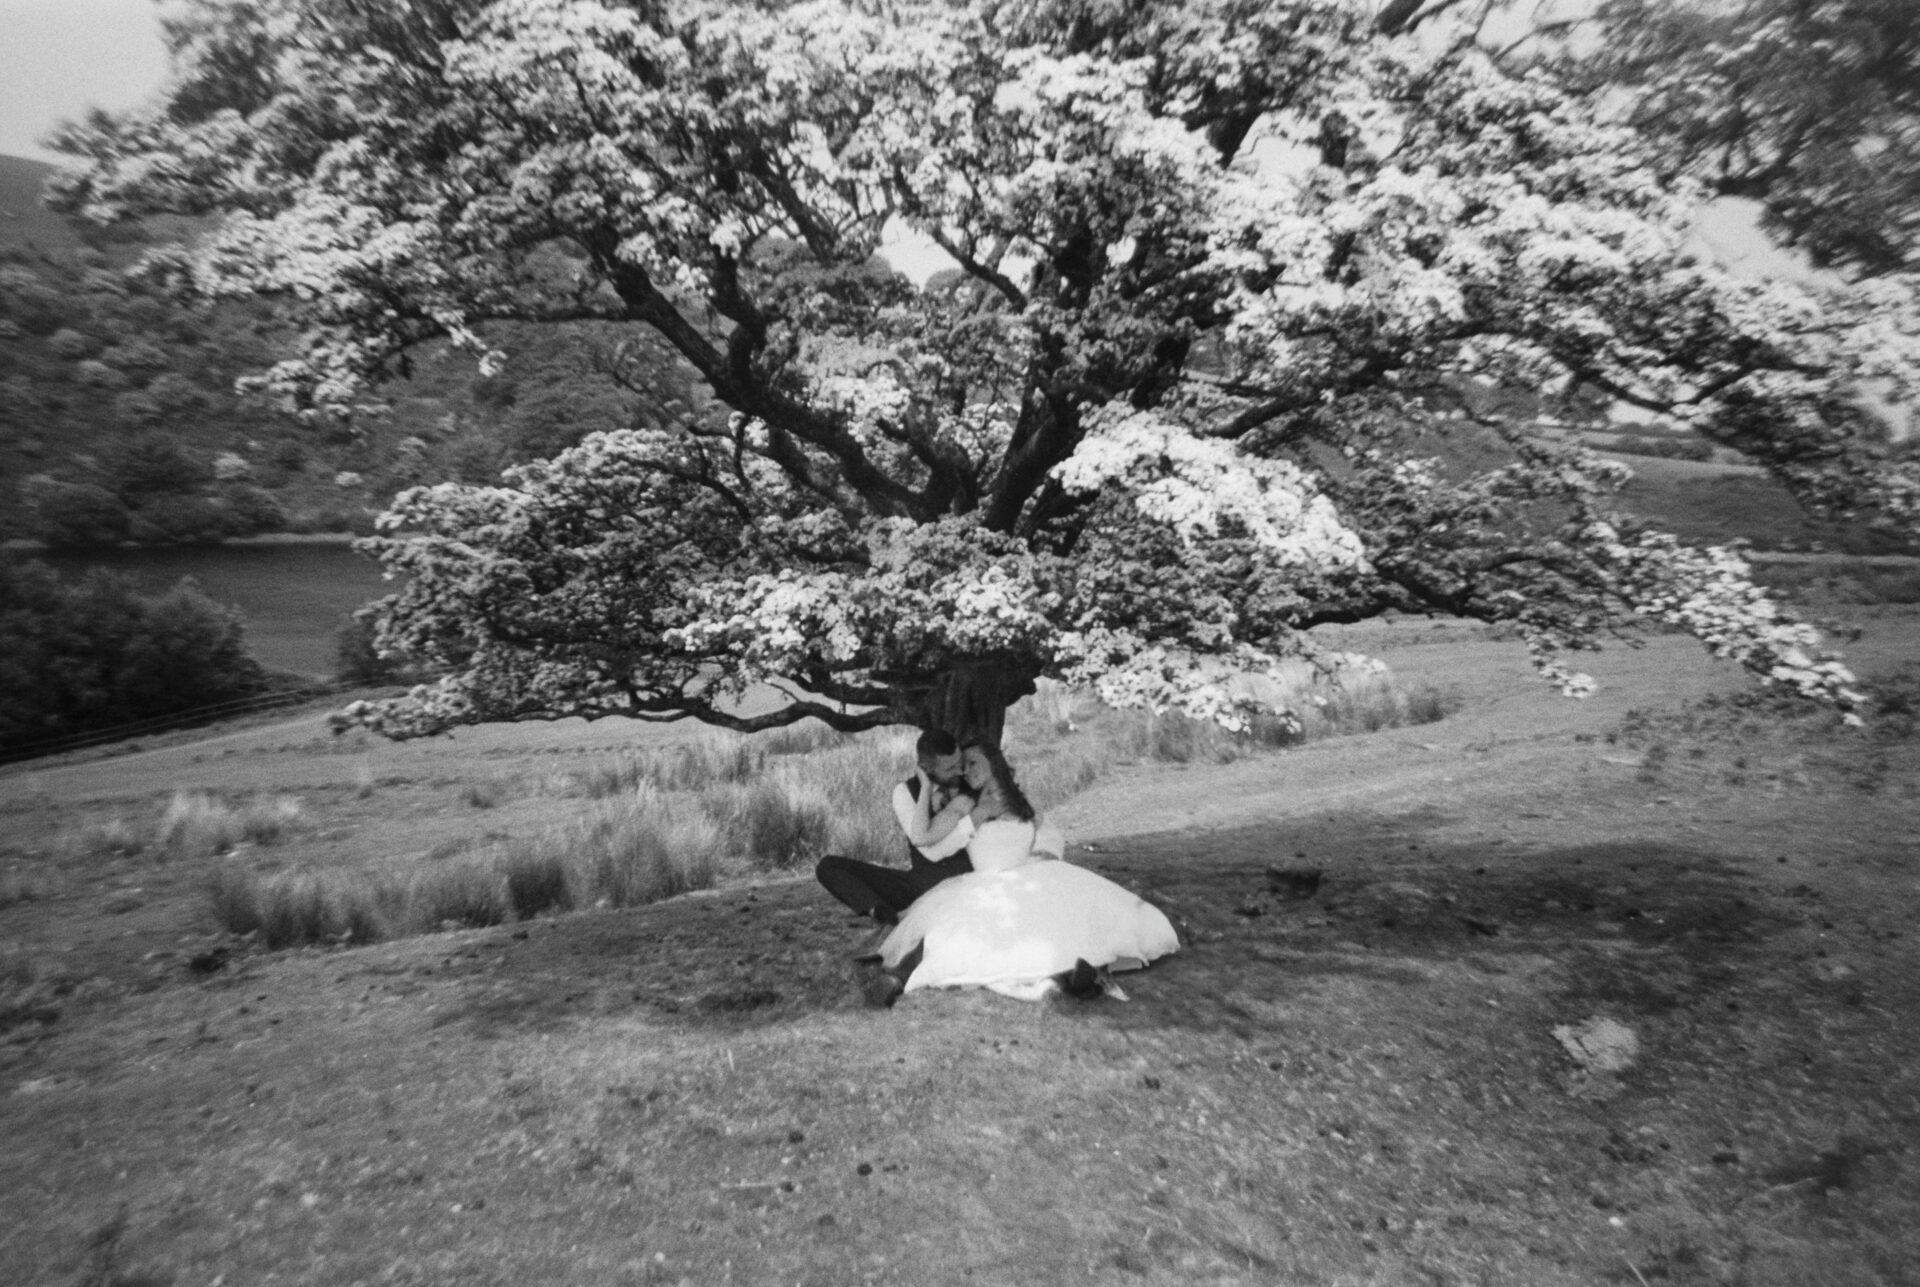 A black and white gifbooth photograph of a couple seated under a large tree, with the individual on the right wearing a white dress suggestive of wedding attire.